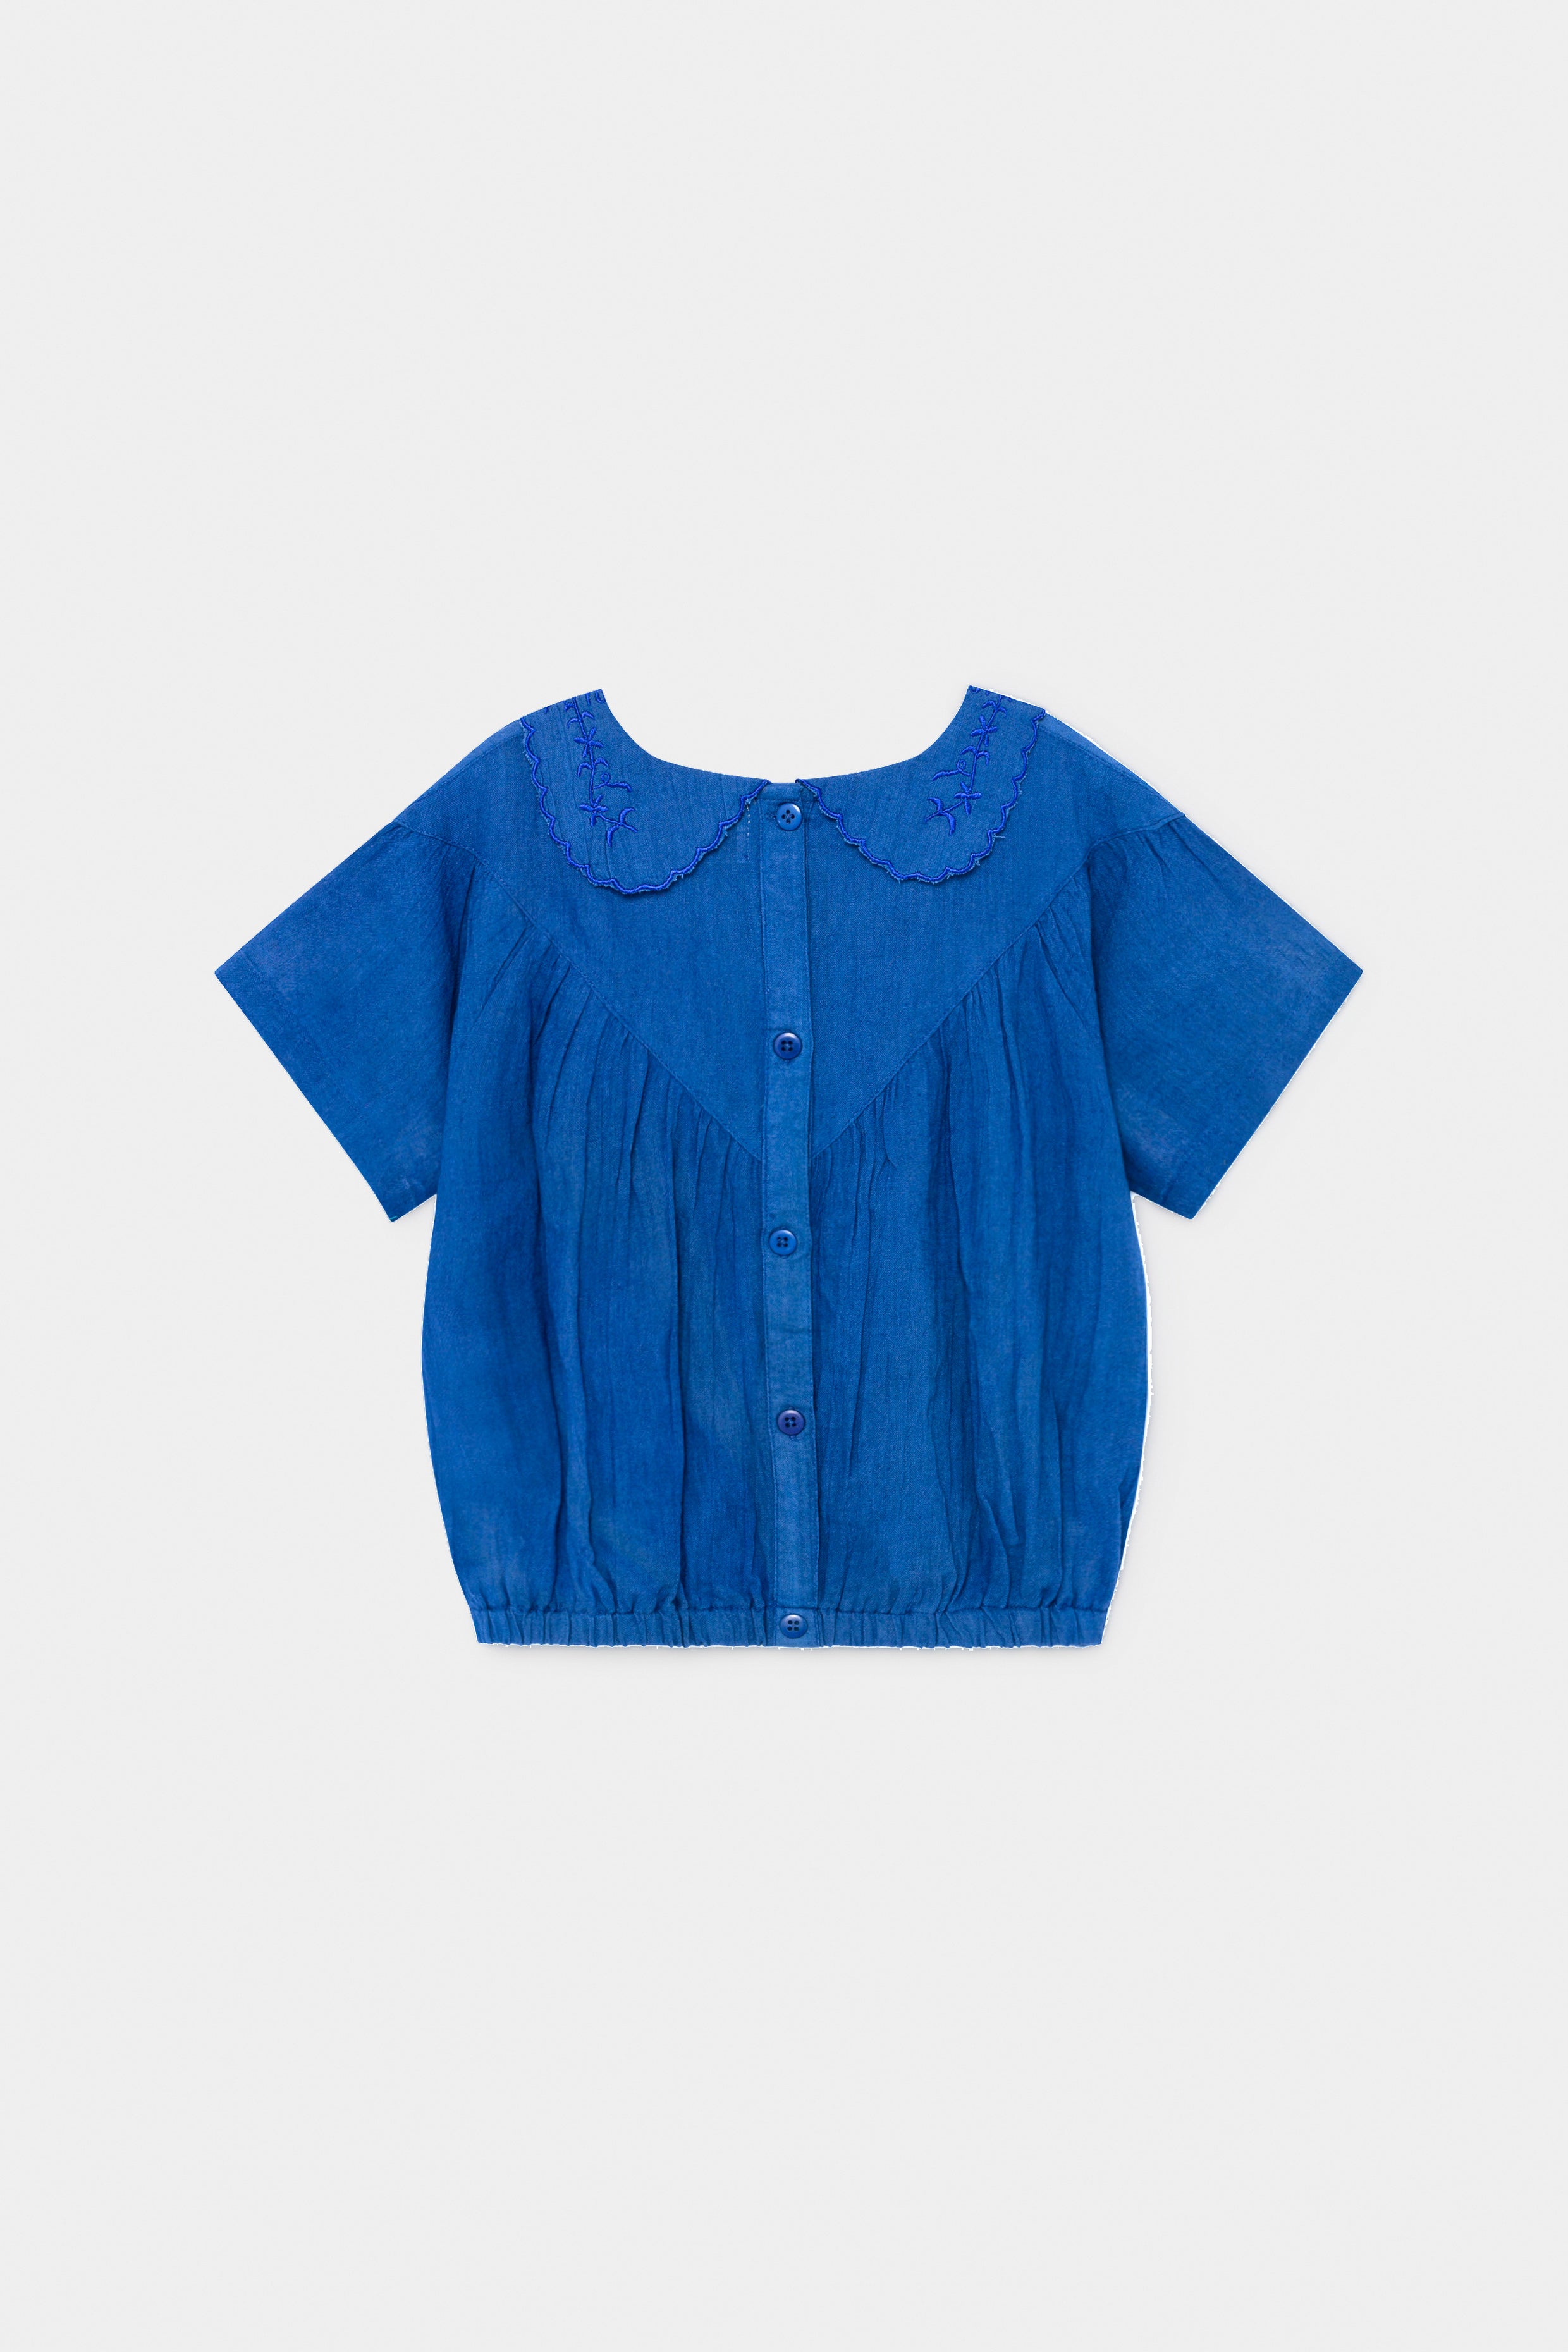 Girls Blue Embroidered Cotton Top